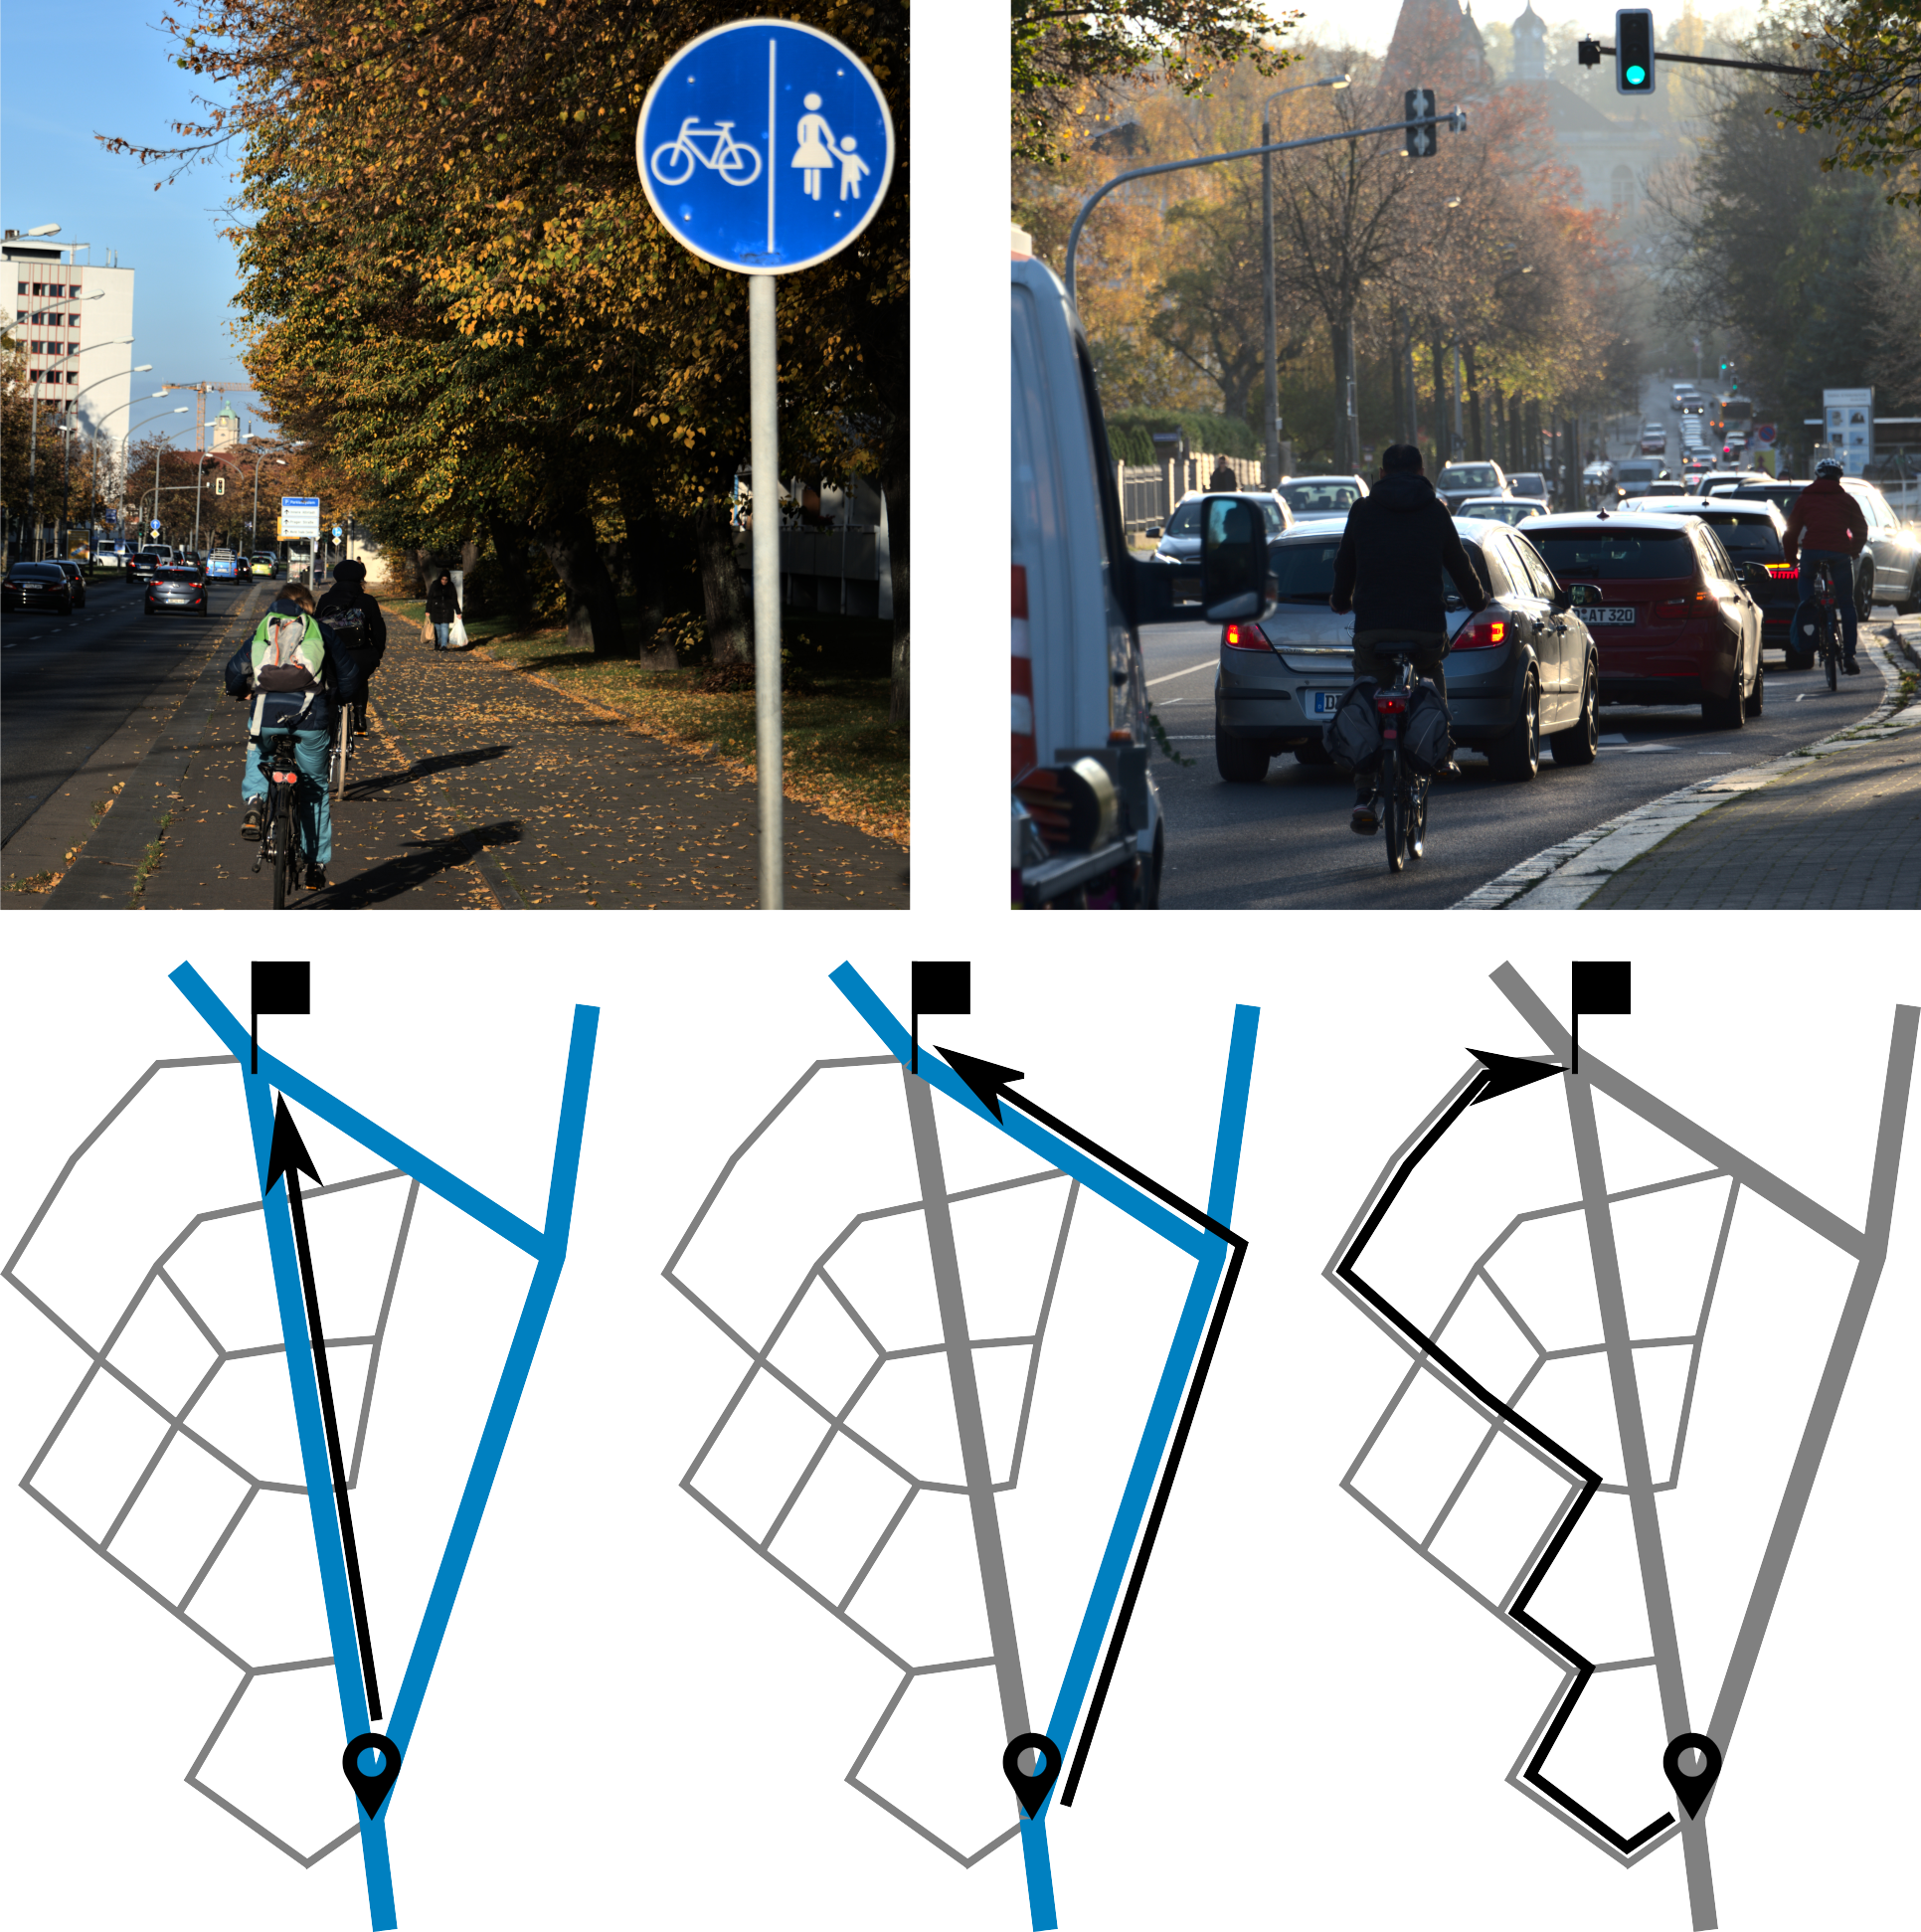 visualisation of route choice schemes of cyclists in urban areas